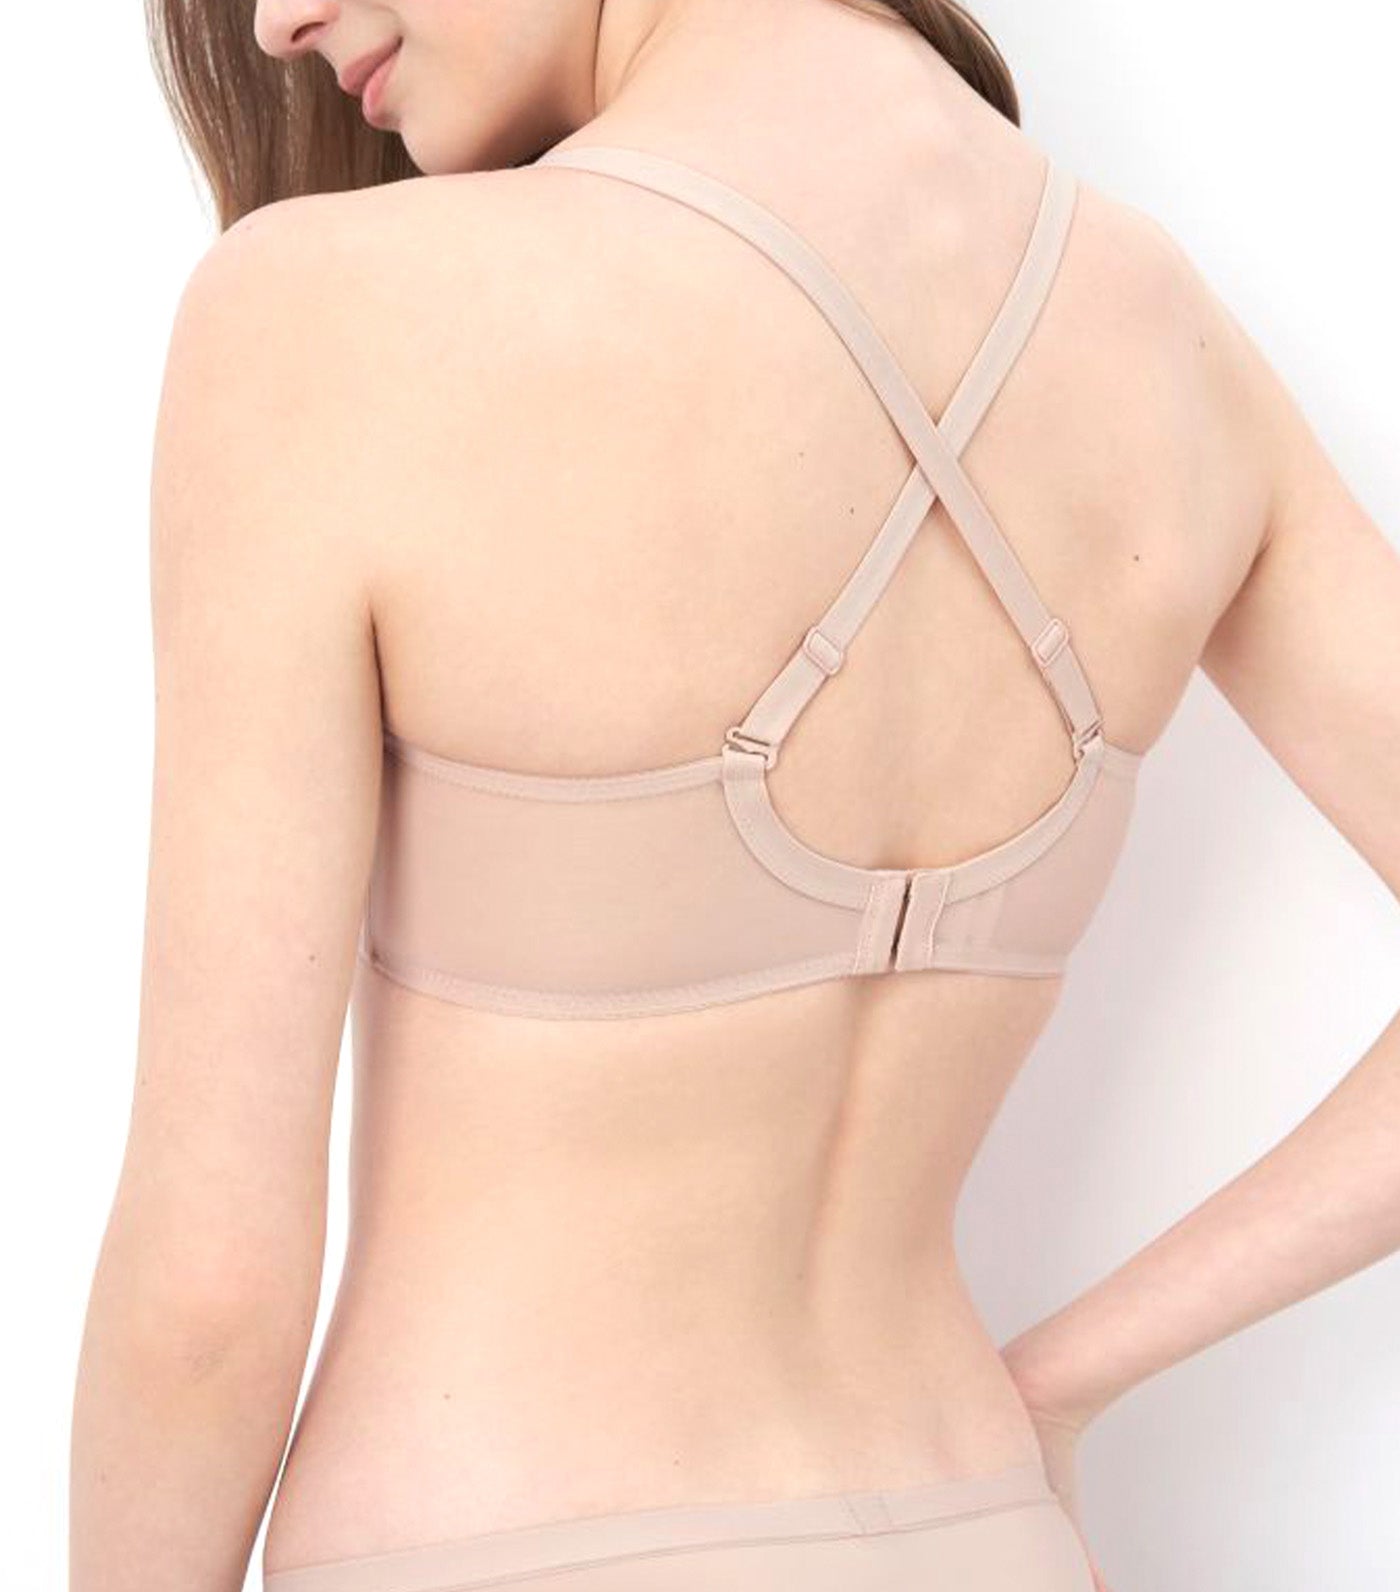 Inside-Out Wired T-Shirt Bra Skin